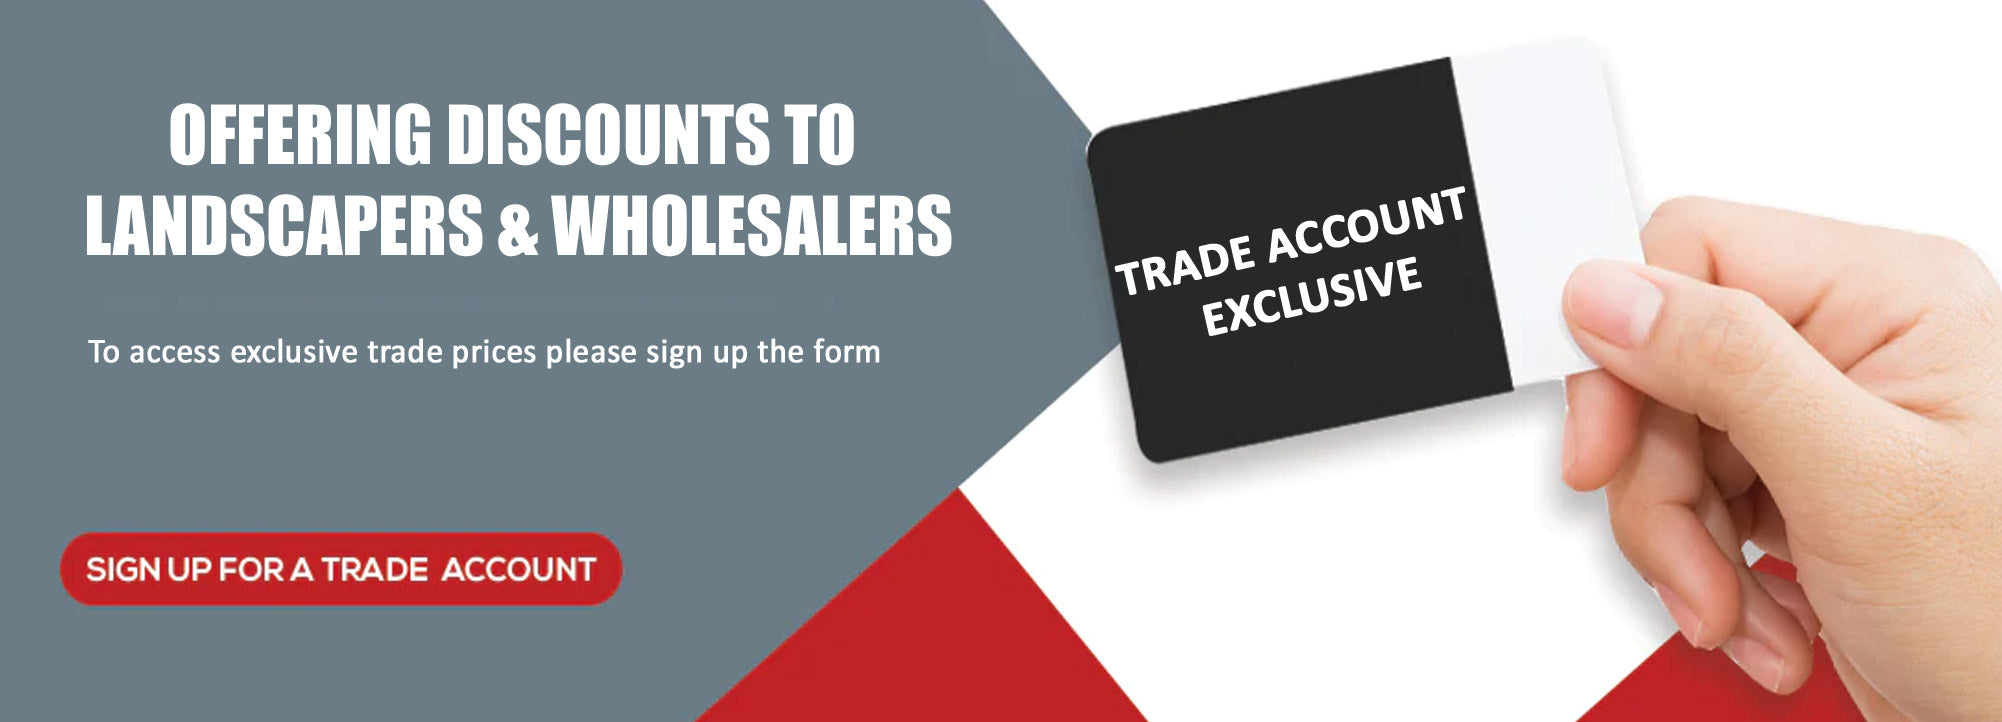 OFFERING DISCOUNTS TO LANDSCAPERS & WHOLESALERS | SIGN UP FOR A TRADE ACCOUNT